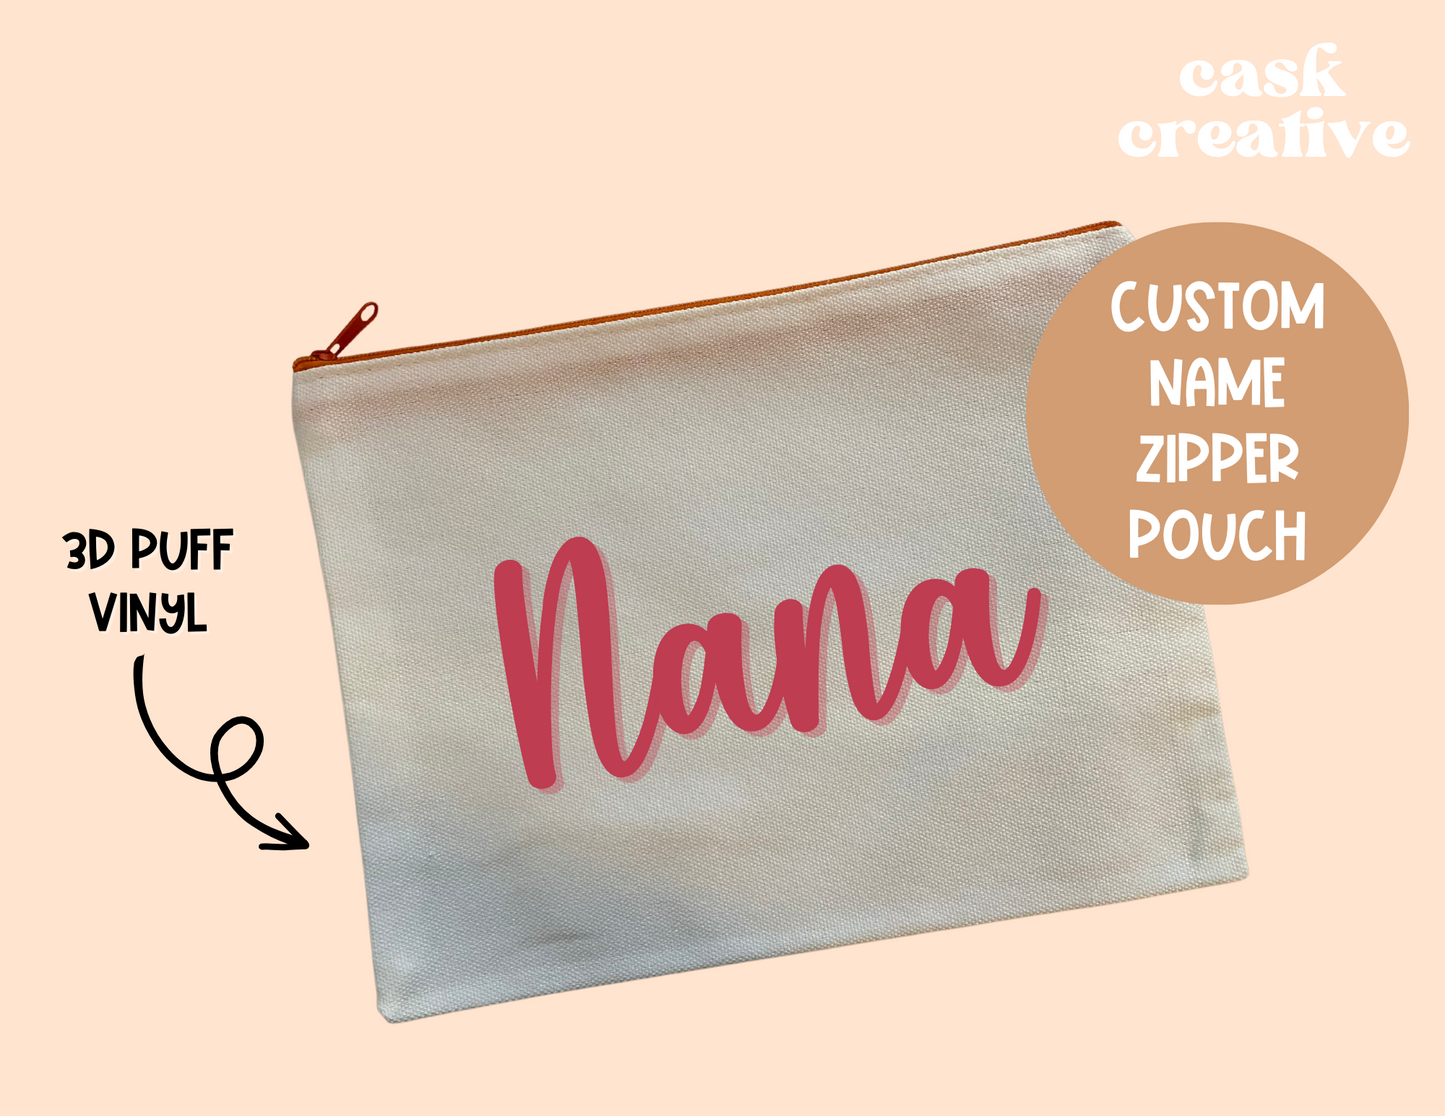 Custom Name Gift Set: Tote Bag Zipper Pouch with Name